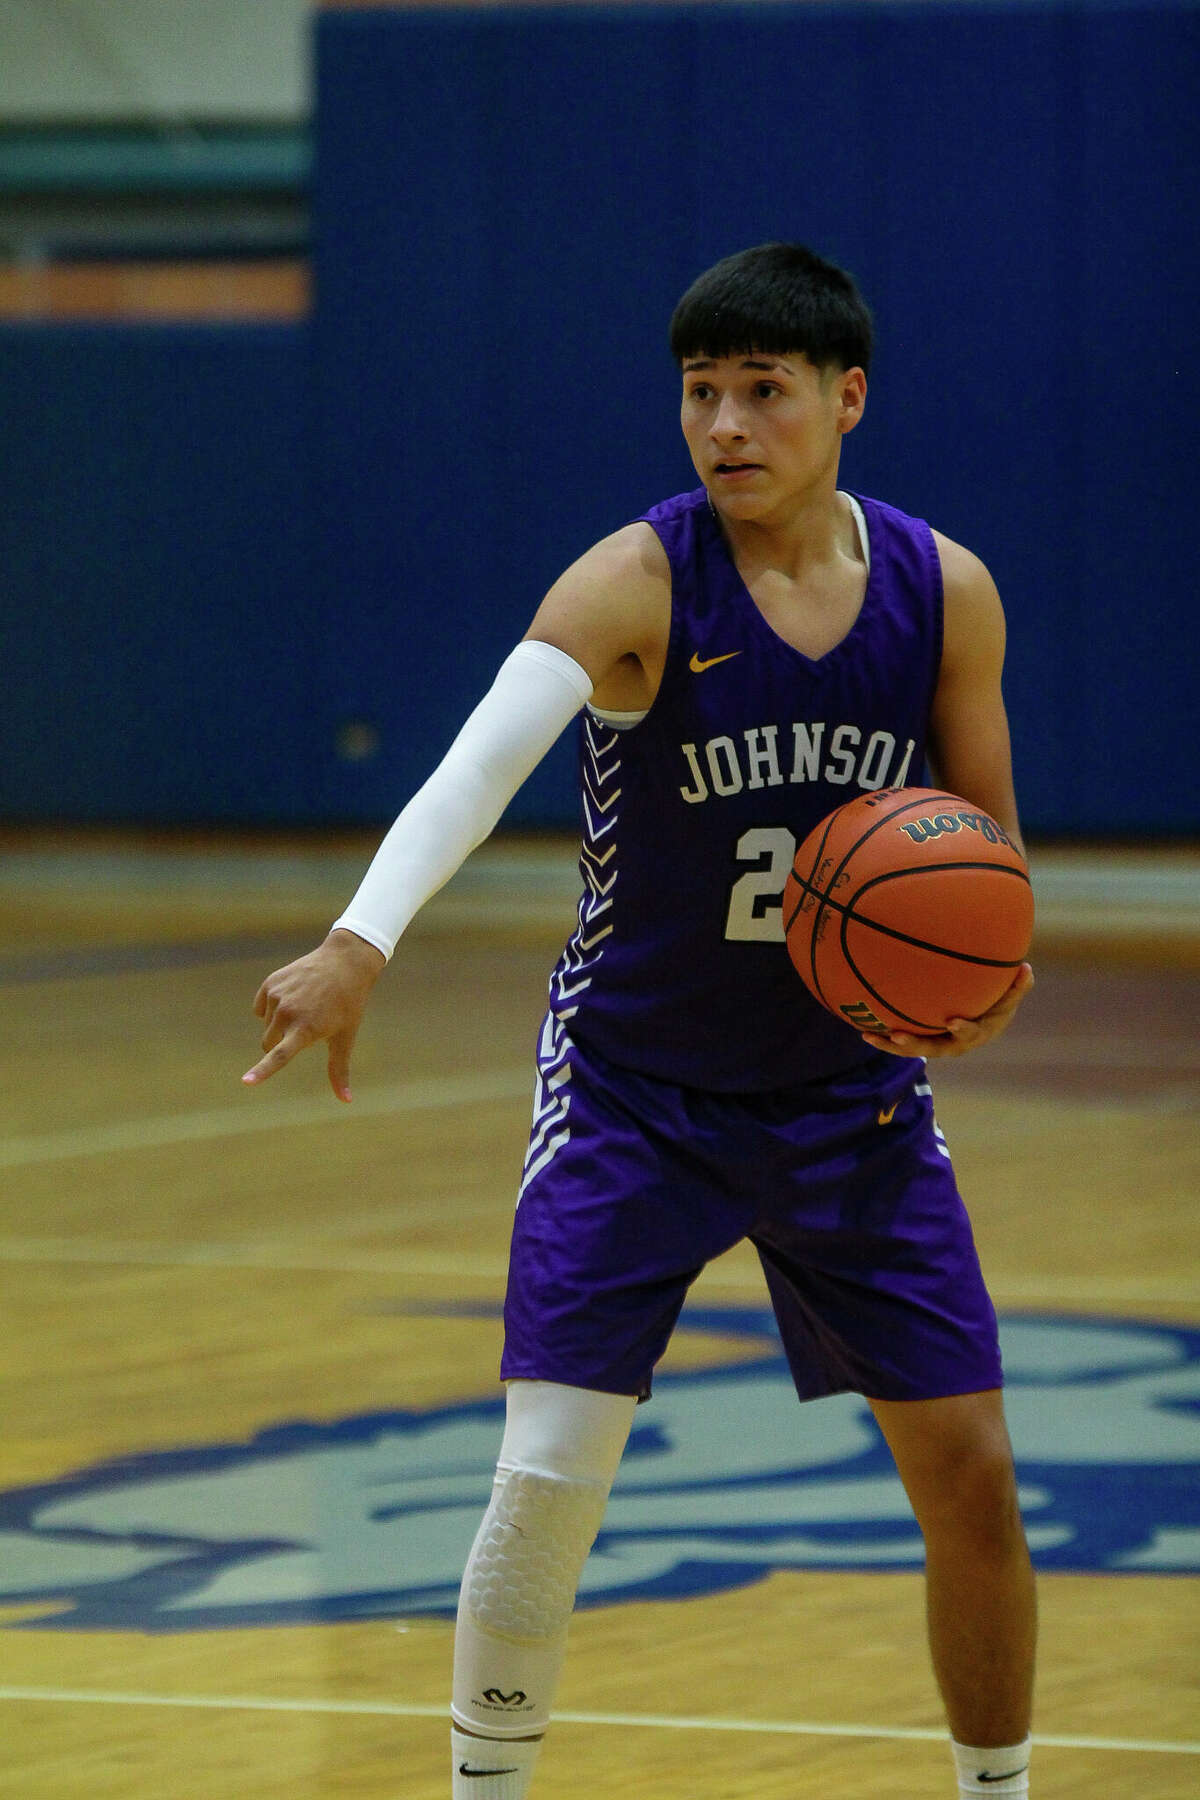 LBJ's Galexander Mata earned All-Tournament honors this past weekend.